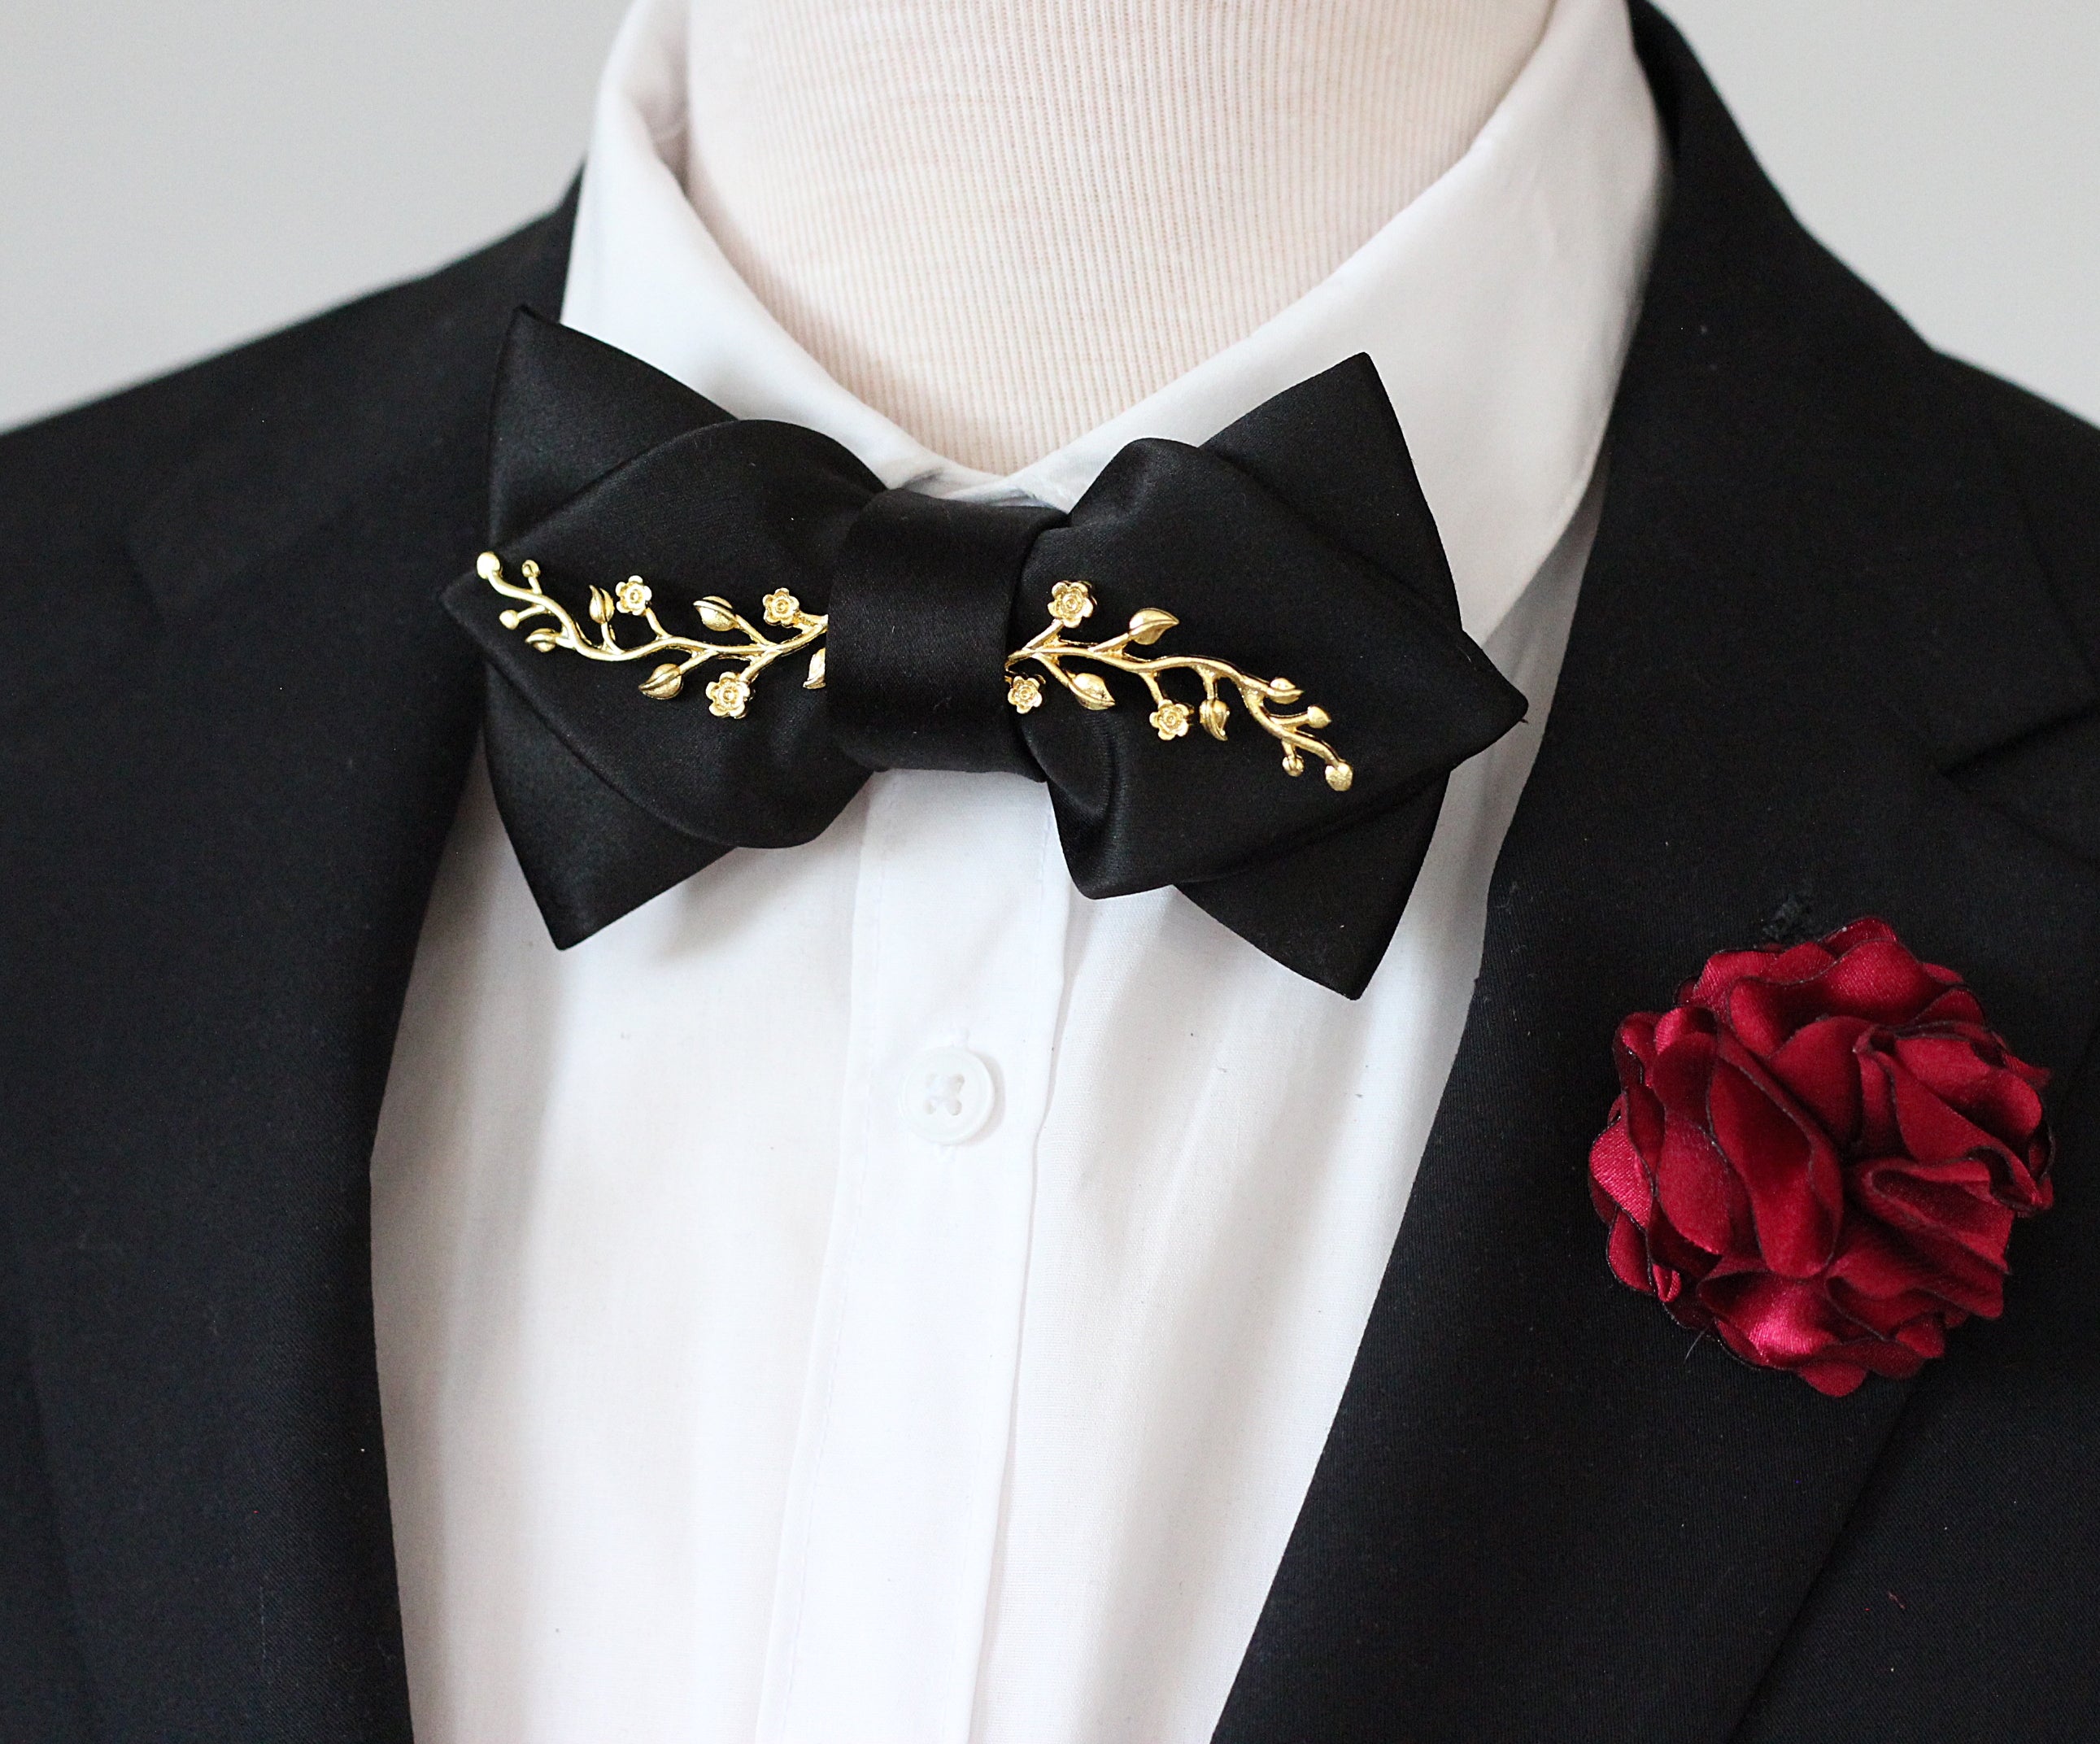 Black and Gold Mens Bow Tie Boutonniere Set, Wedding Black Gold Bowtie, Black Satin Tuxedo Bow Tie Bow Tie Only